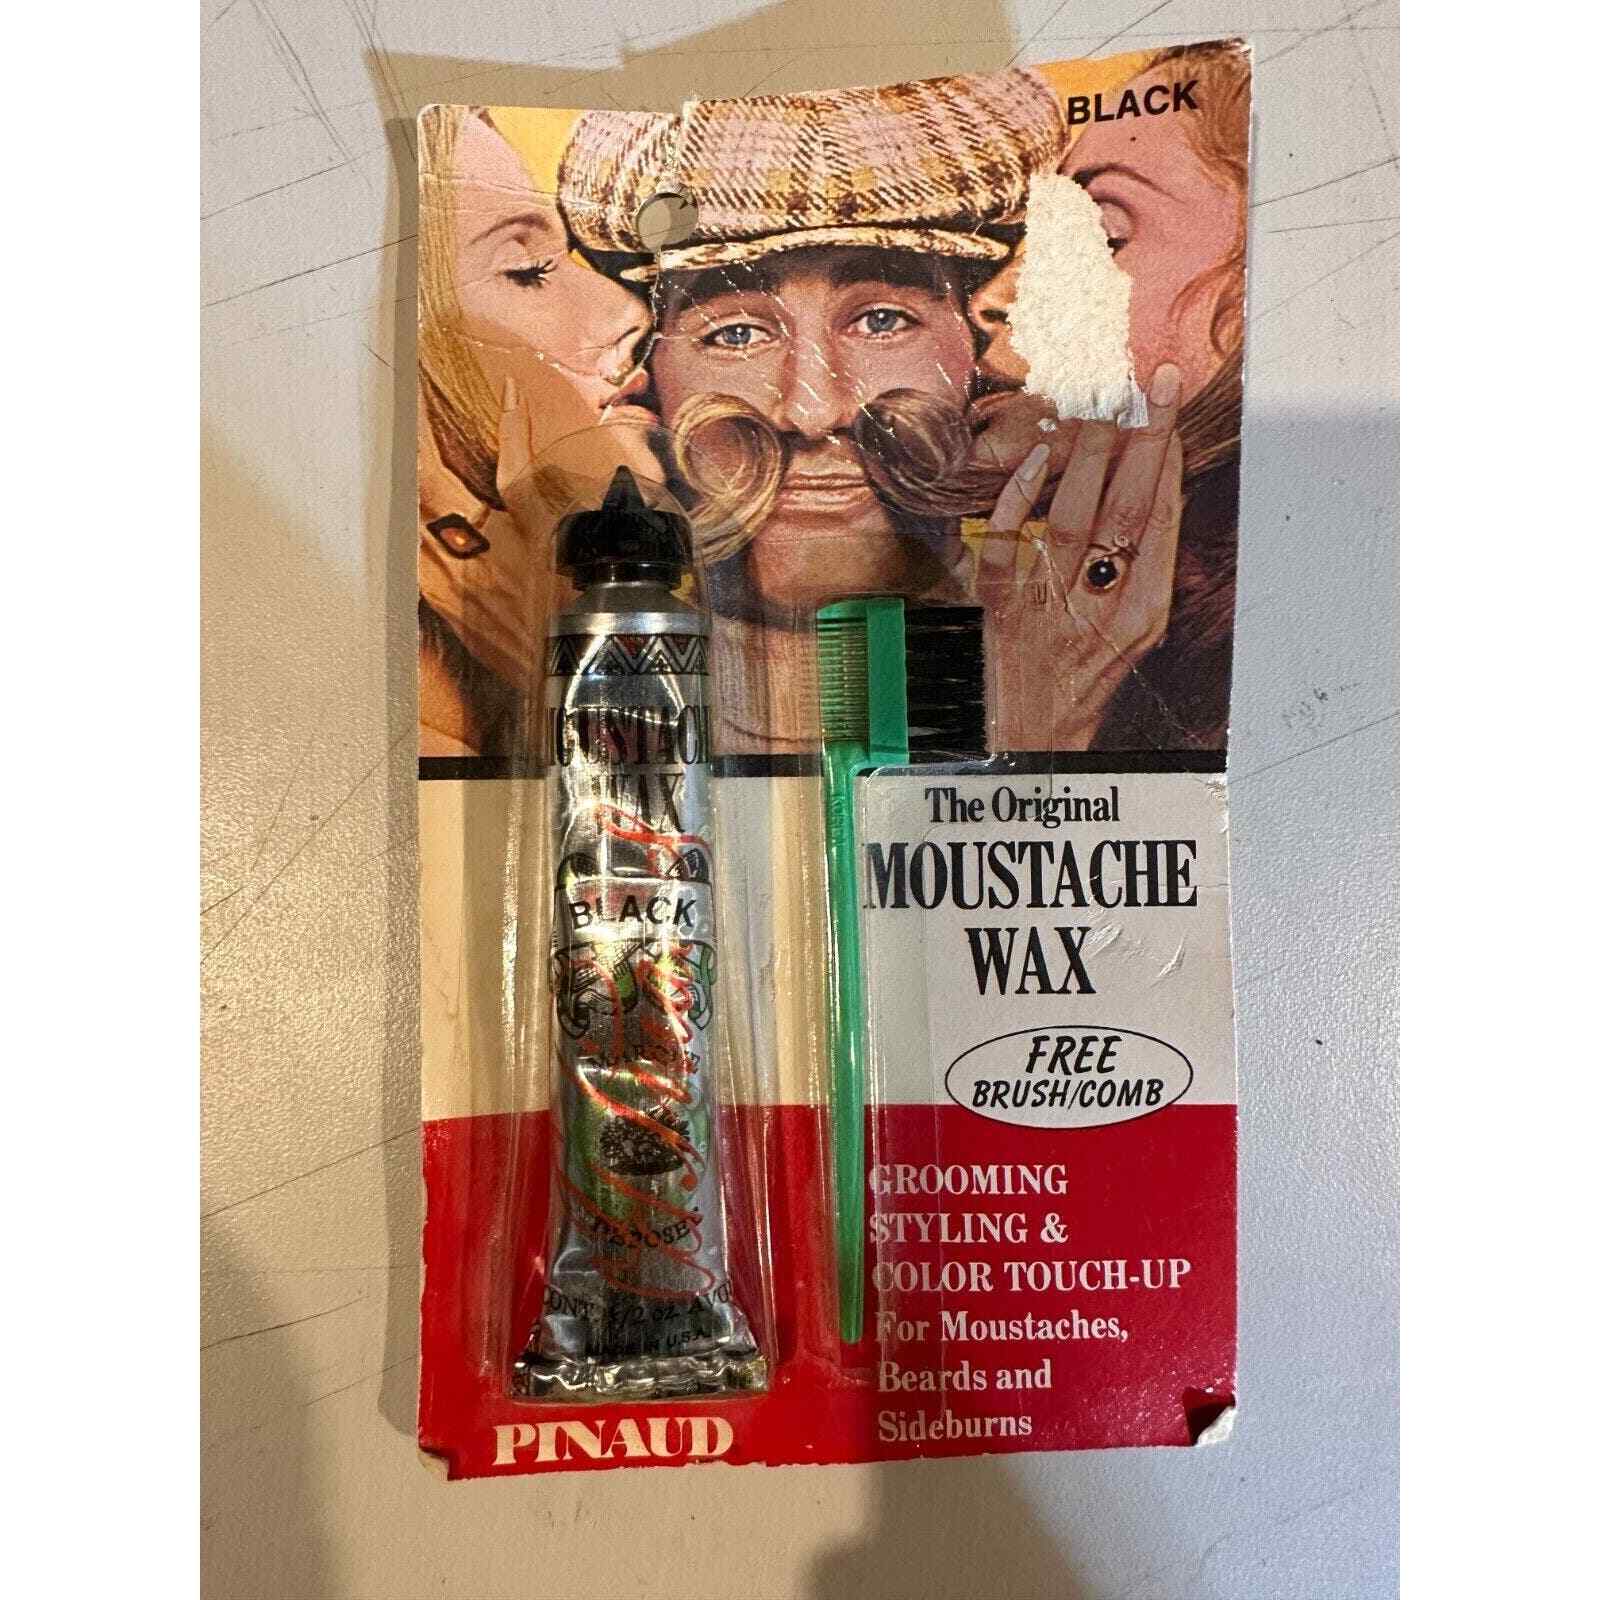 Pinaud Vintage Original Mustache Wax, Old Packaging - Collectable